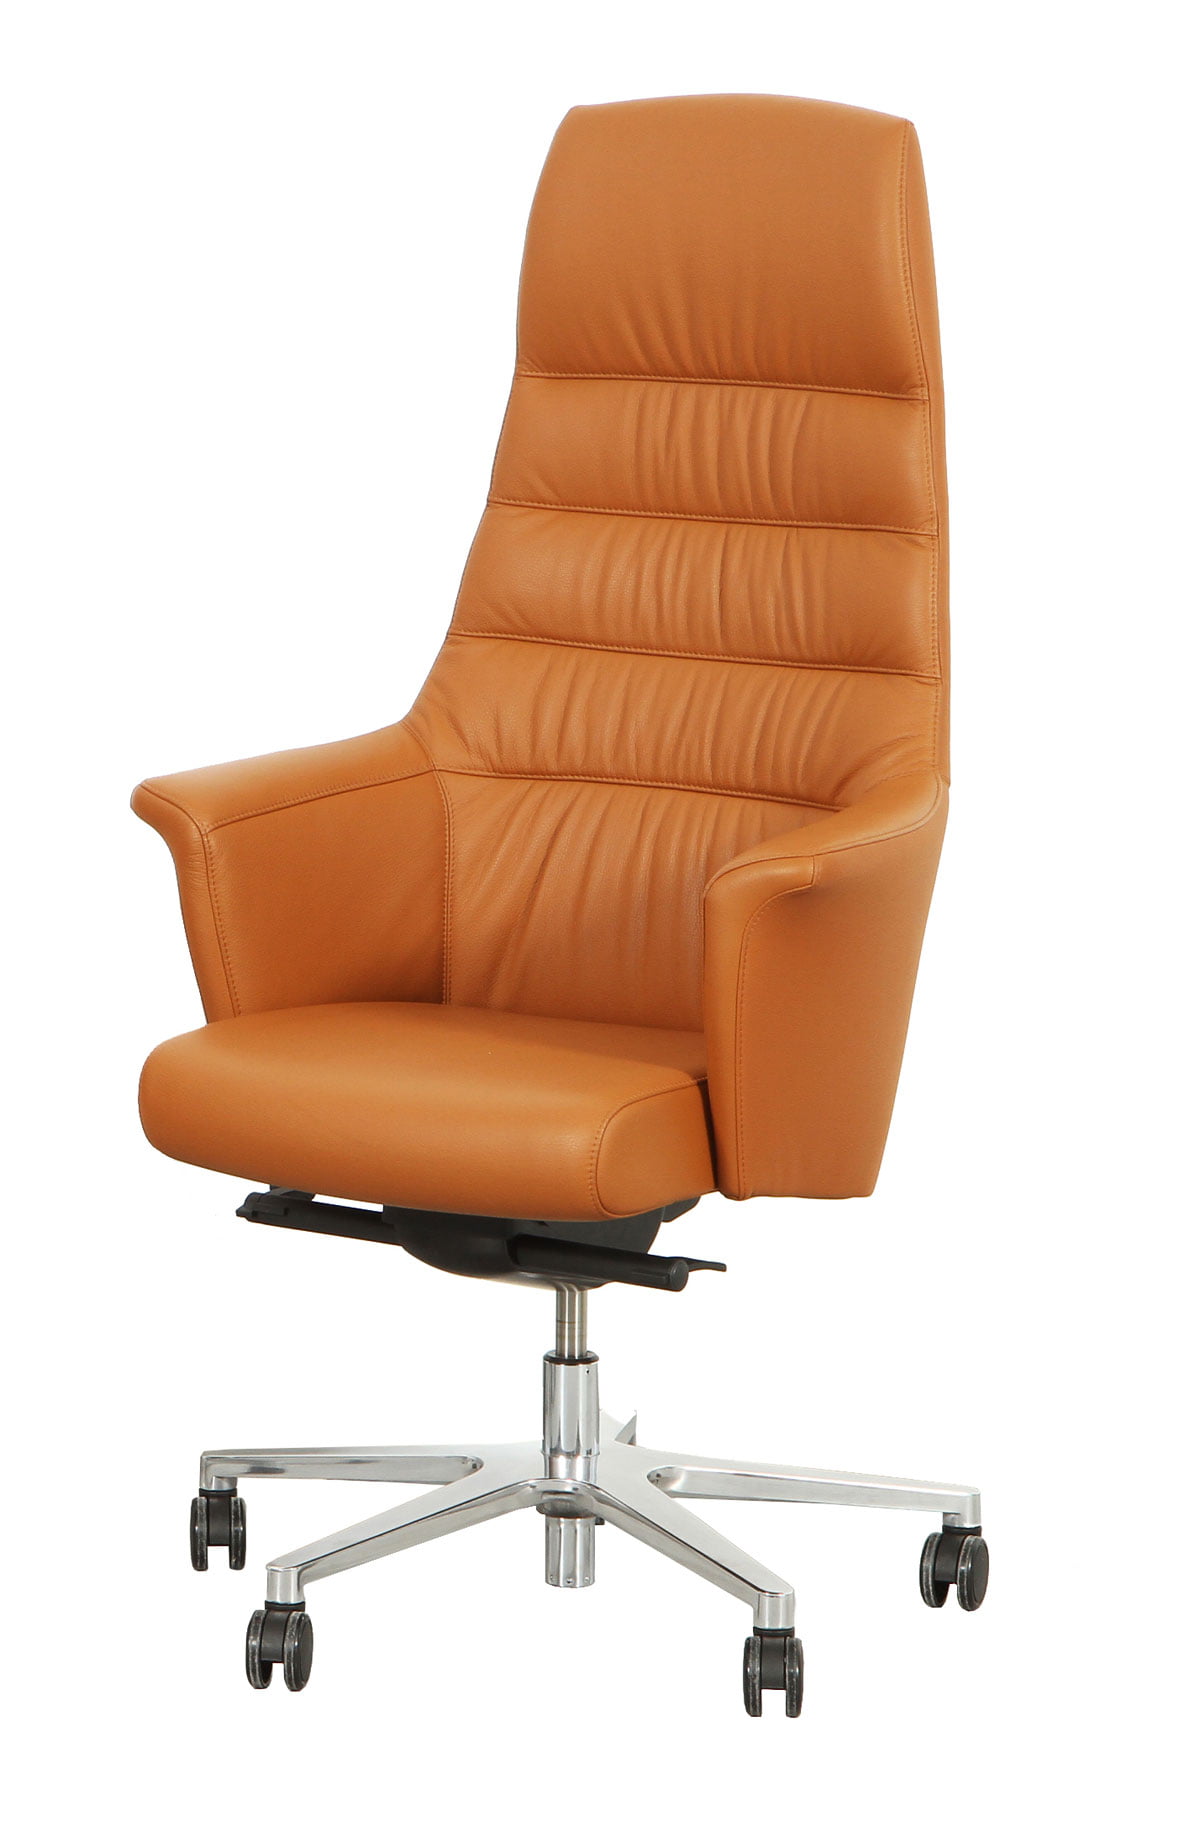 Caramel color conference room chair